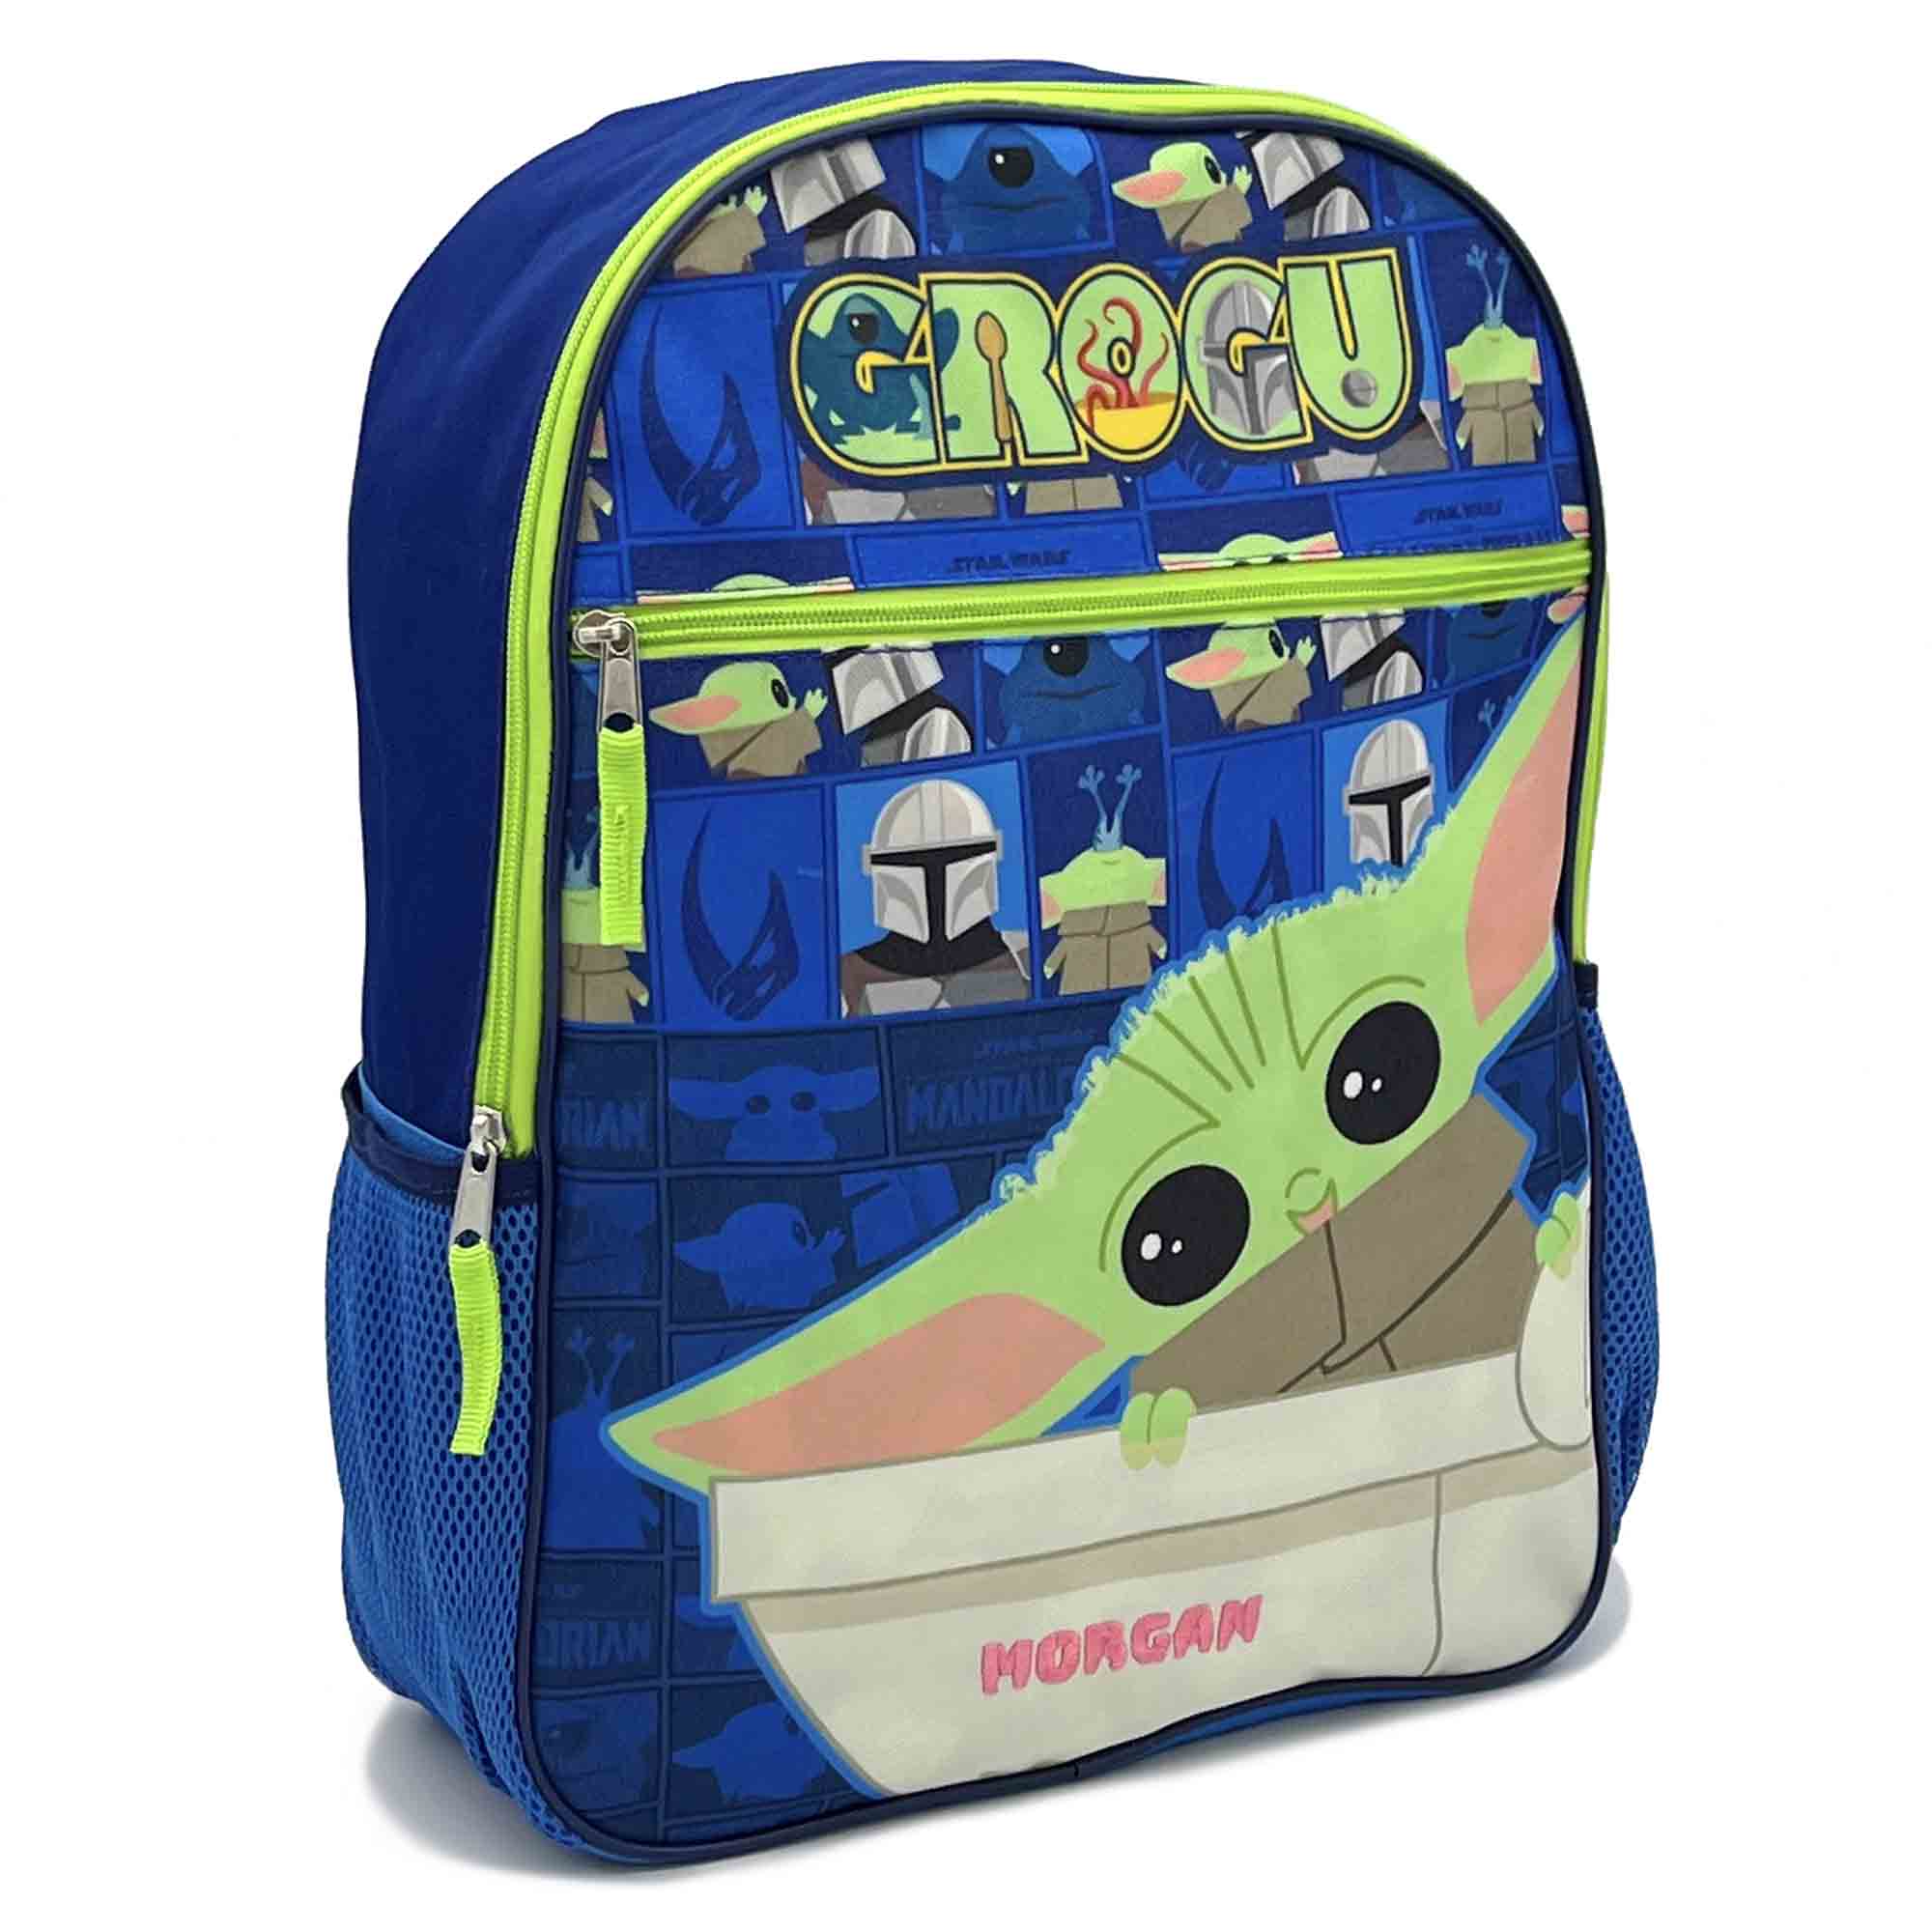 Personalized Grogu Baby Yoda Backpack - Blue & Lime, 16 Inch – Dibsies  Personalization Station